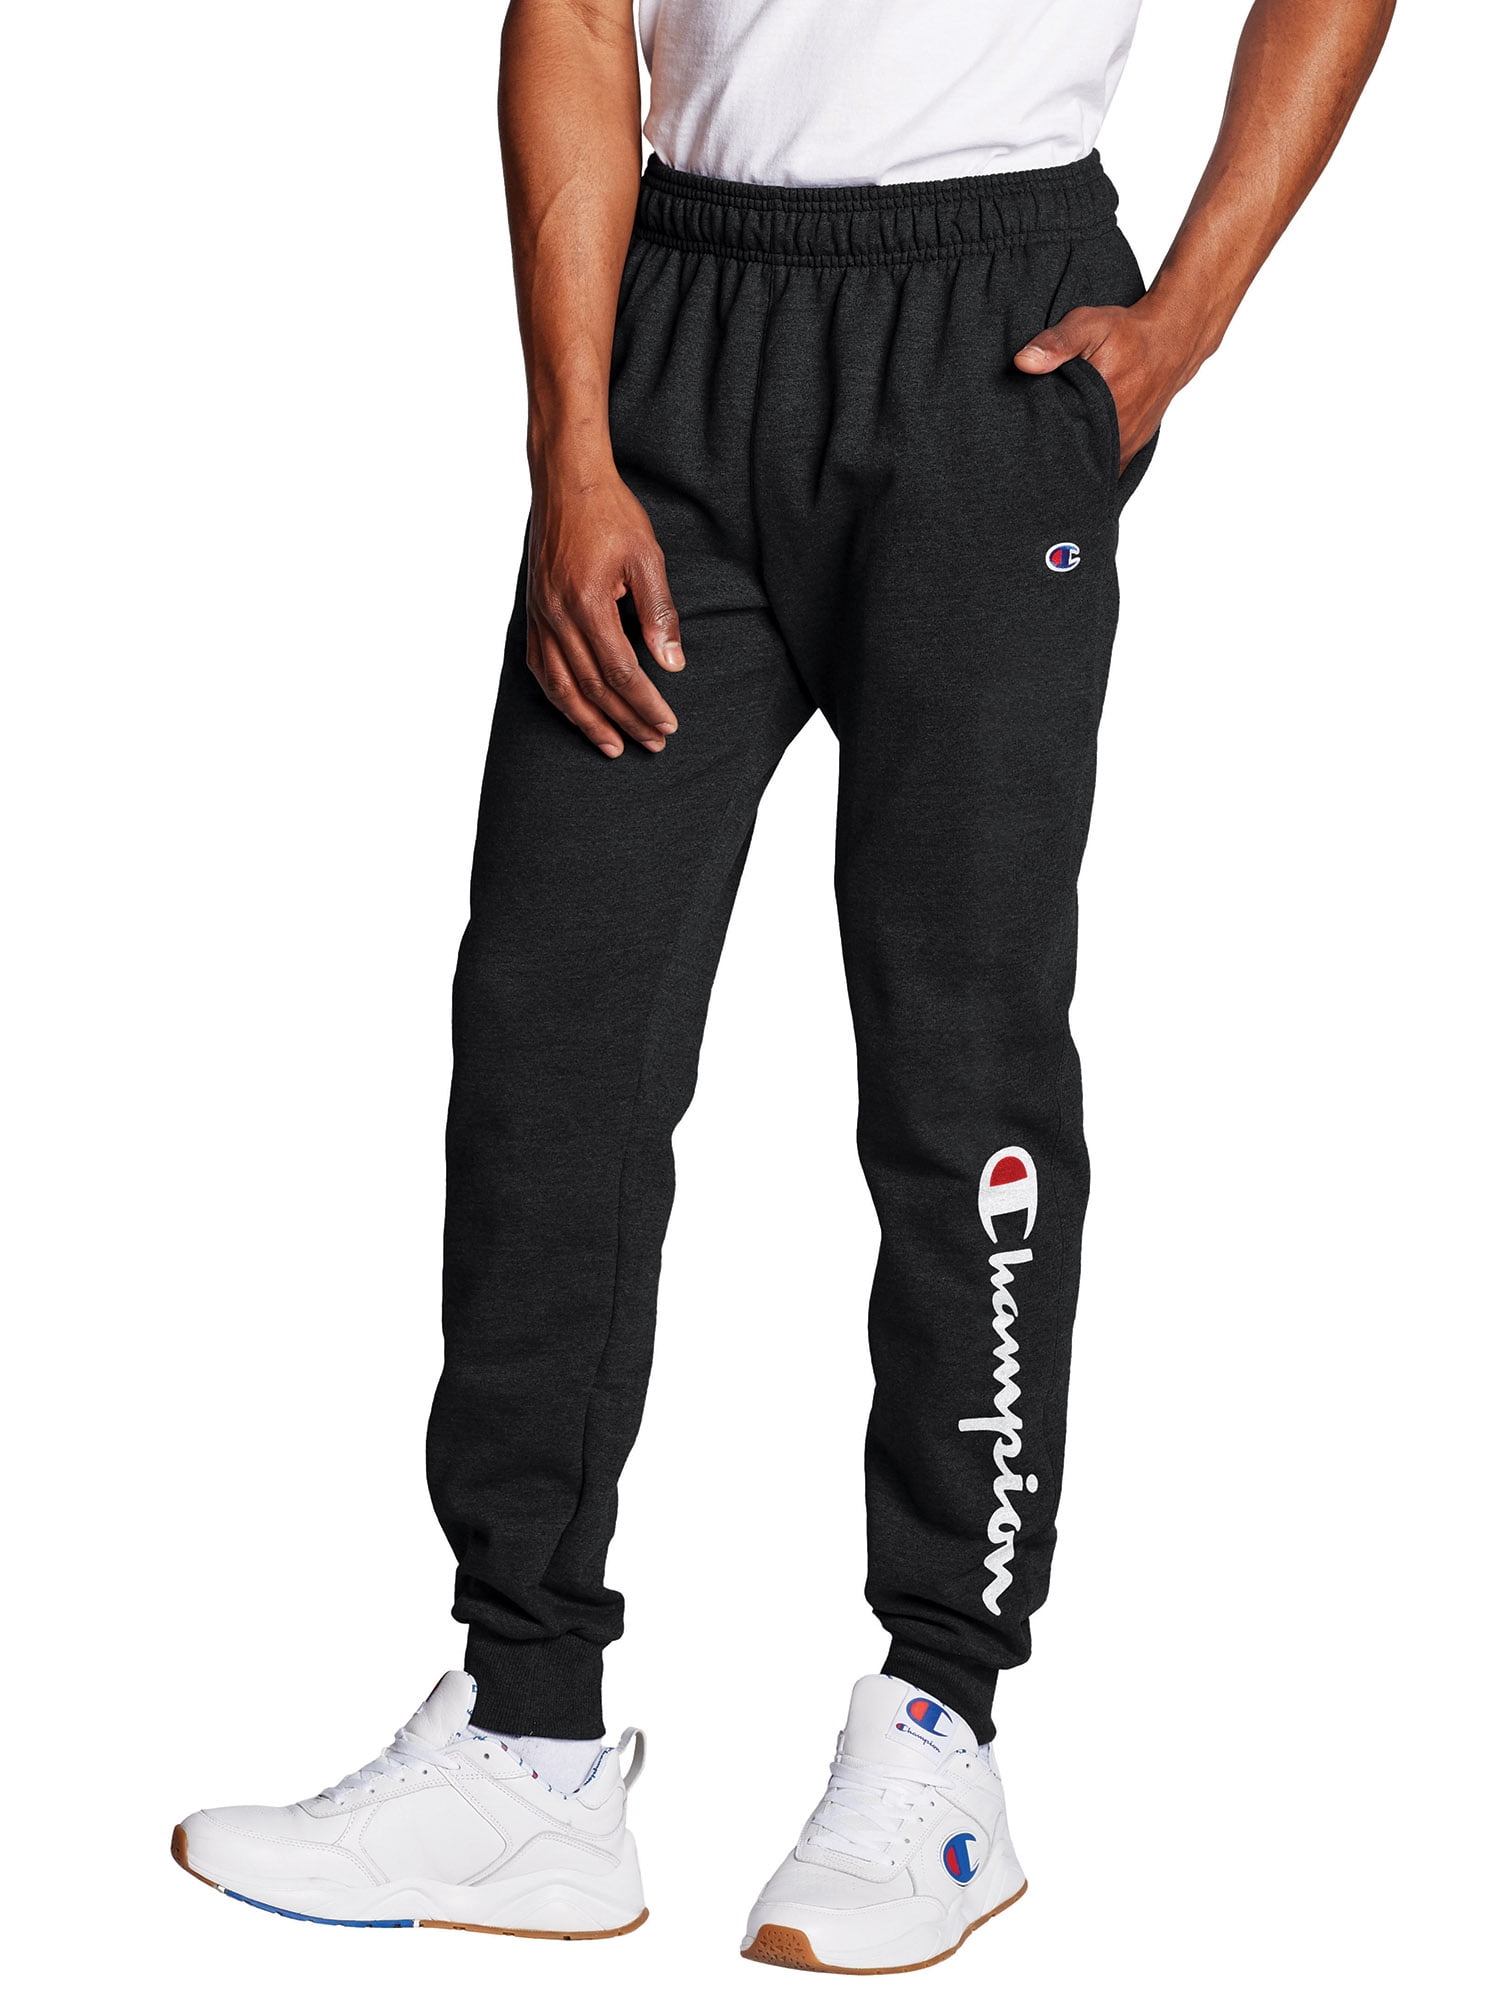 Syd Nysgerrighed nål Champion Mens and Big Mens Powerblend Fleece Graphic Jogger up to Size 2XL  - Walmart.com